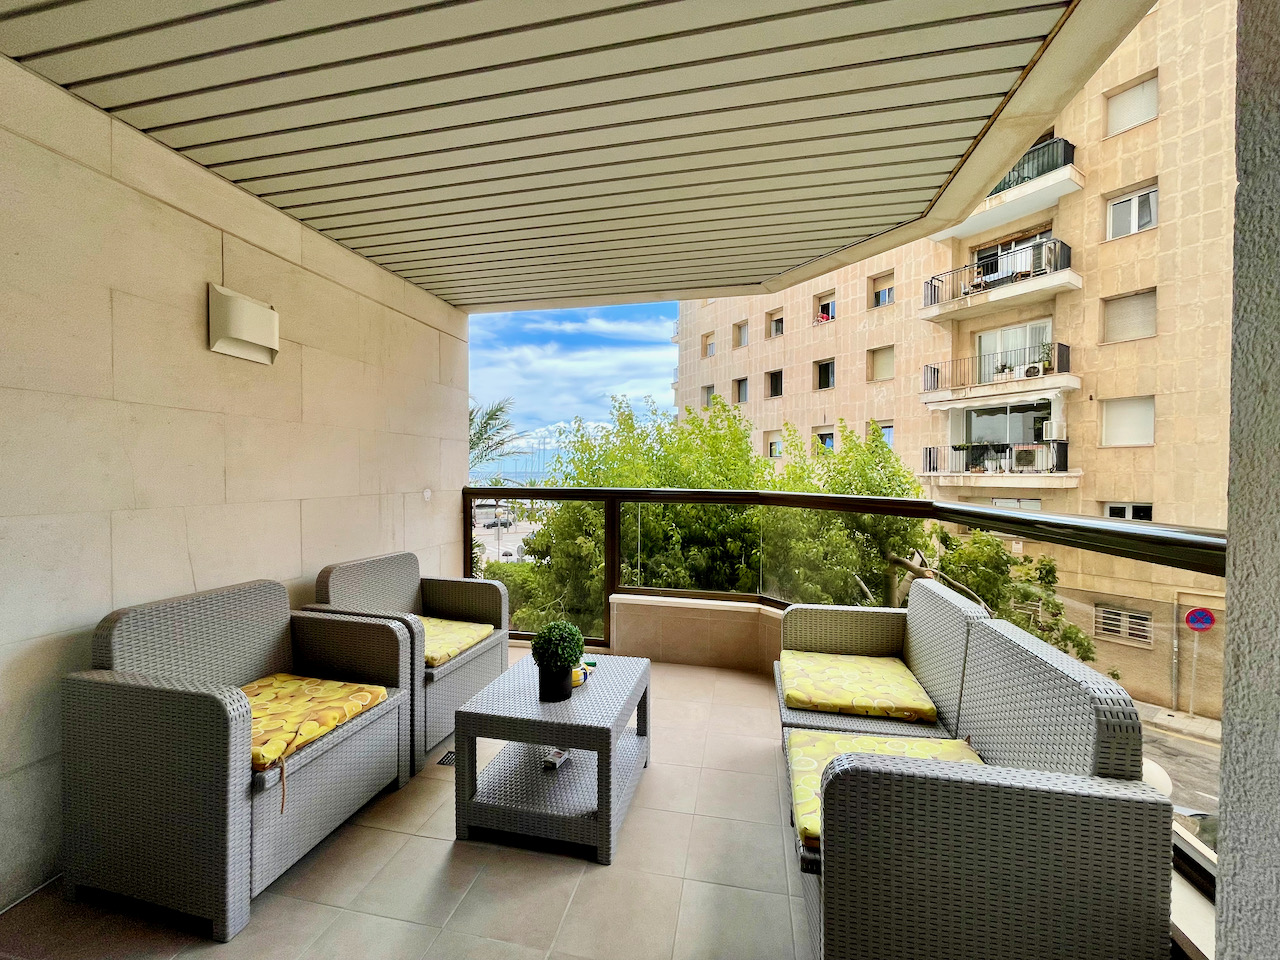 Spacious refurbished flat in iconic Palmareal building with harbour views